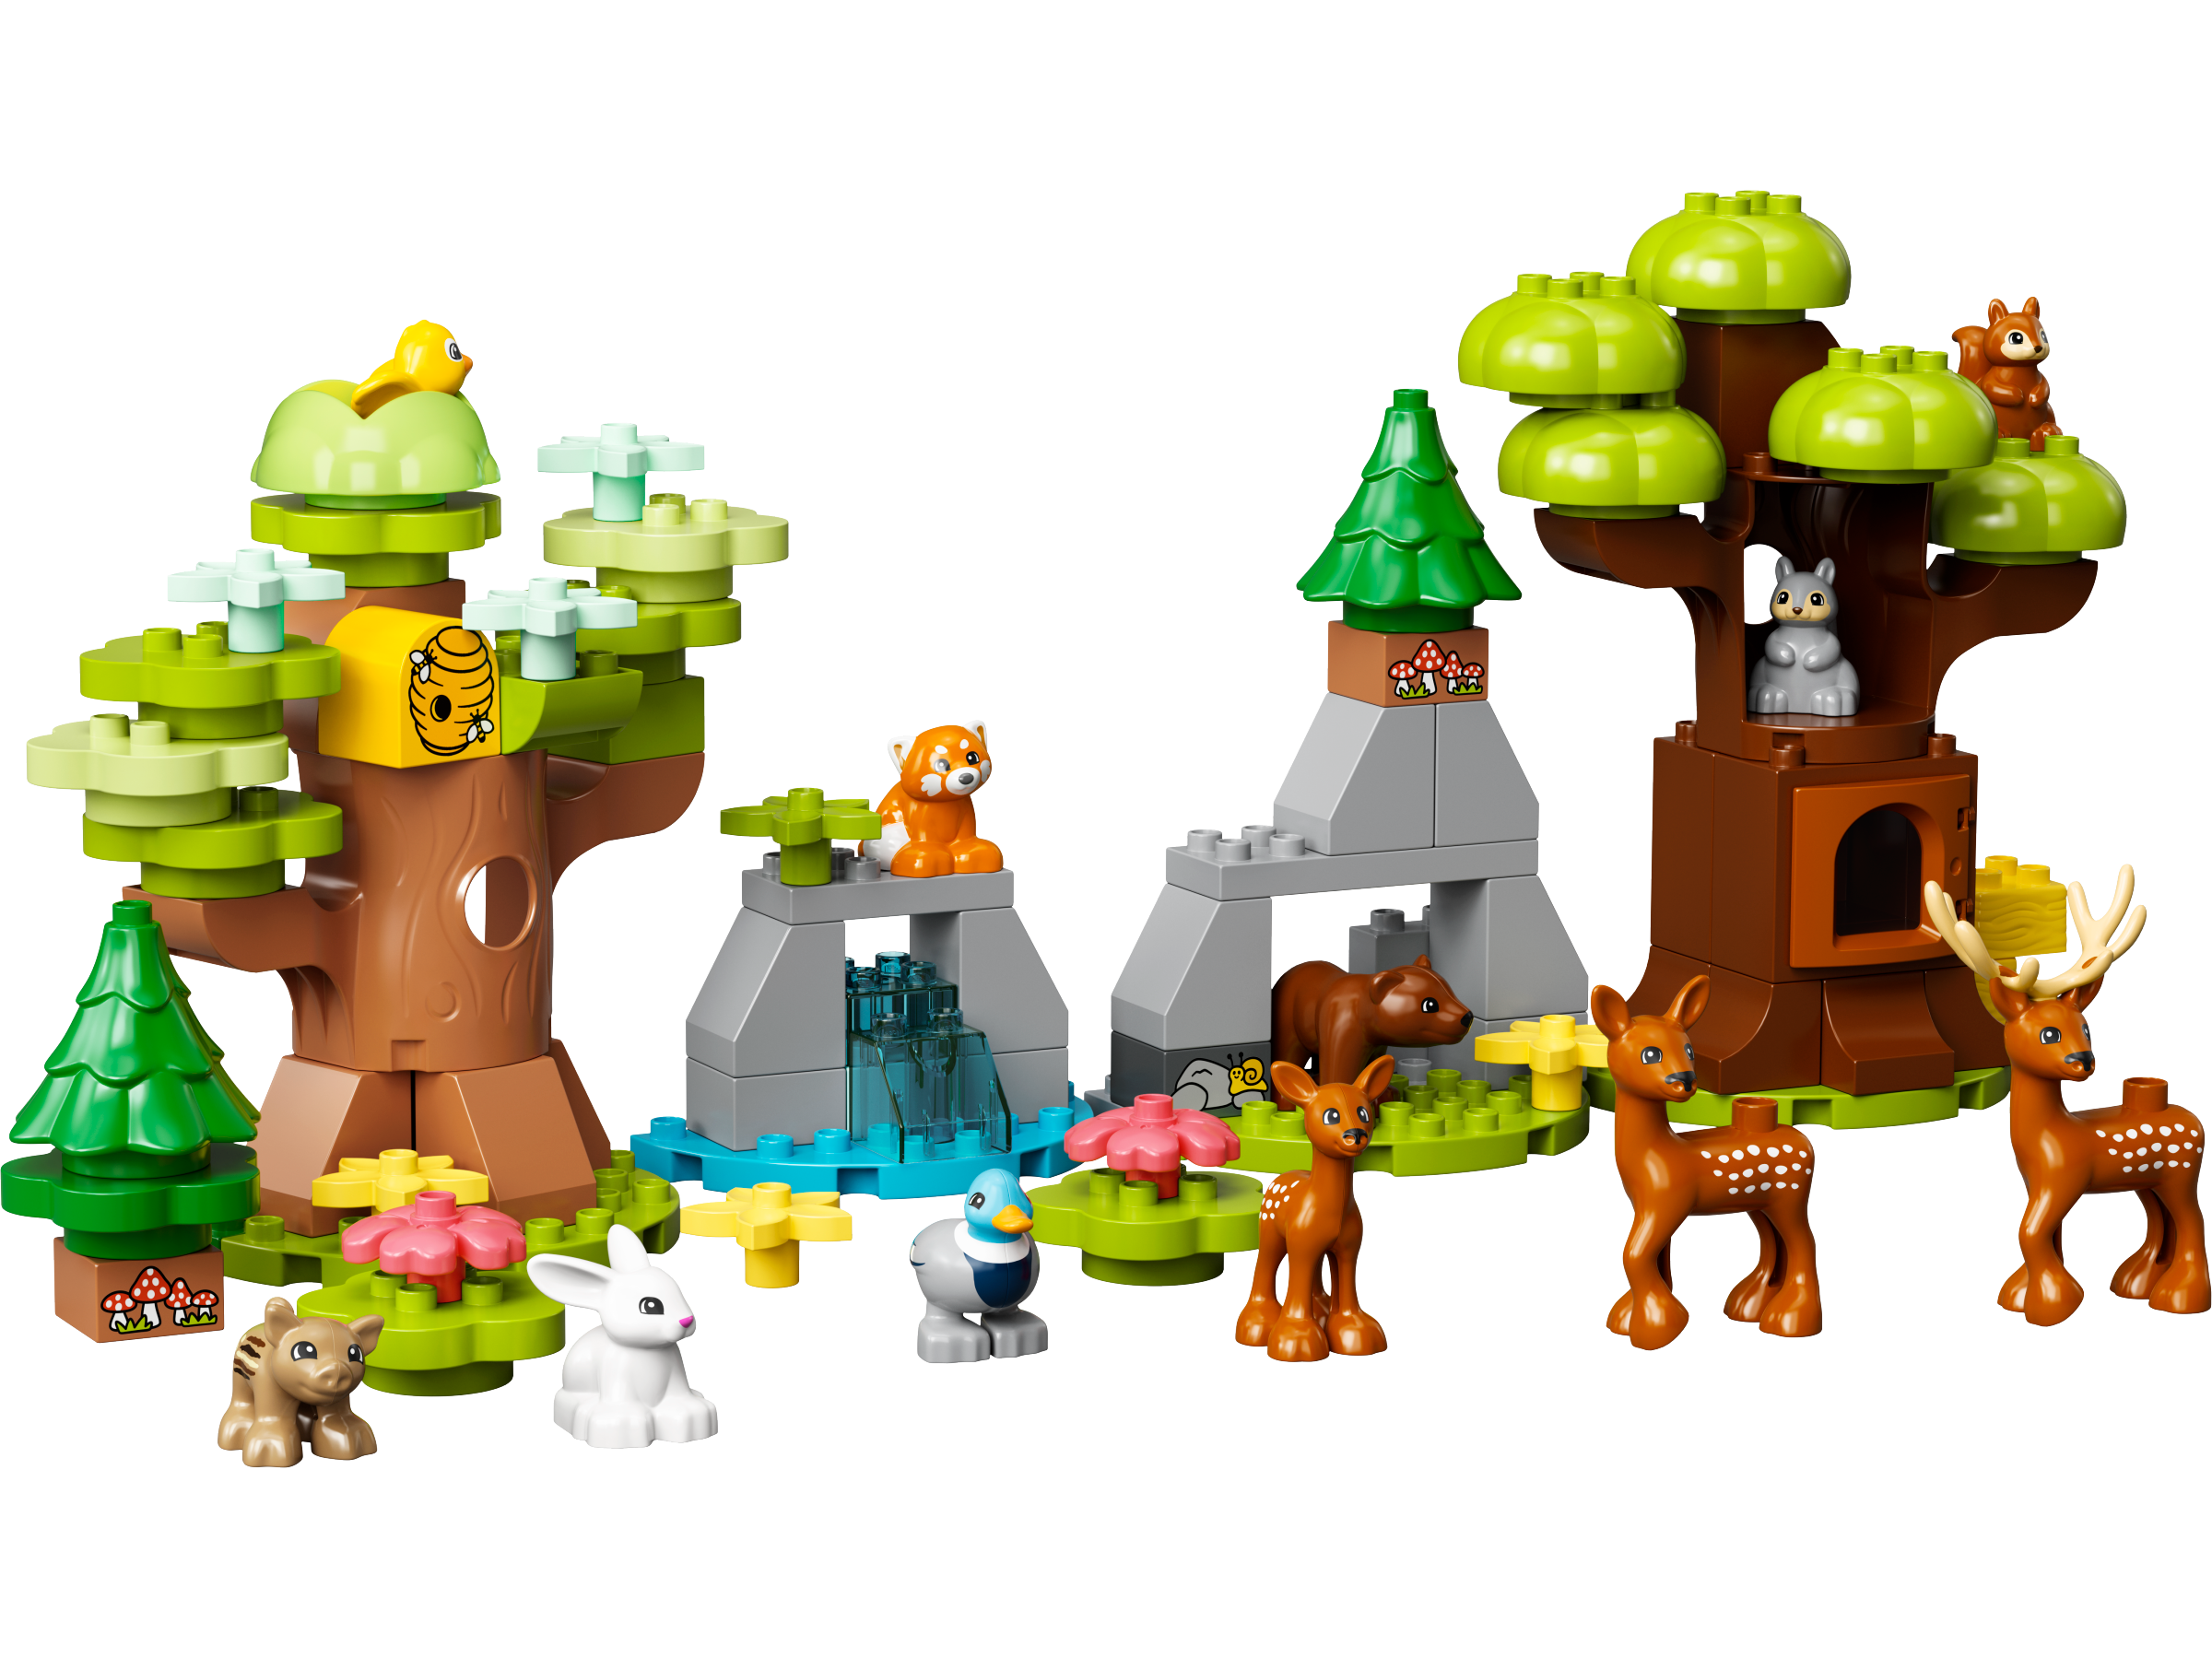 Animaux sauvages d'Europe 10979, DUPLO®